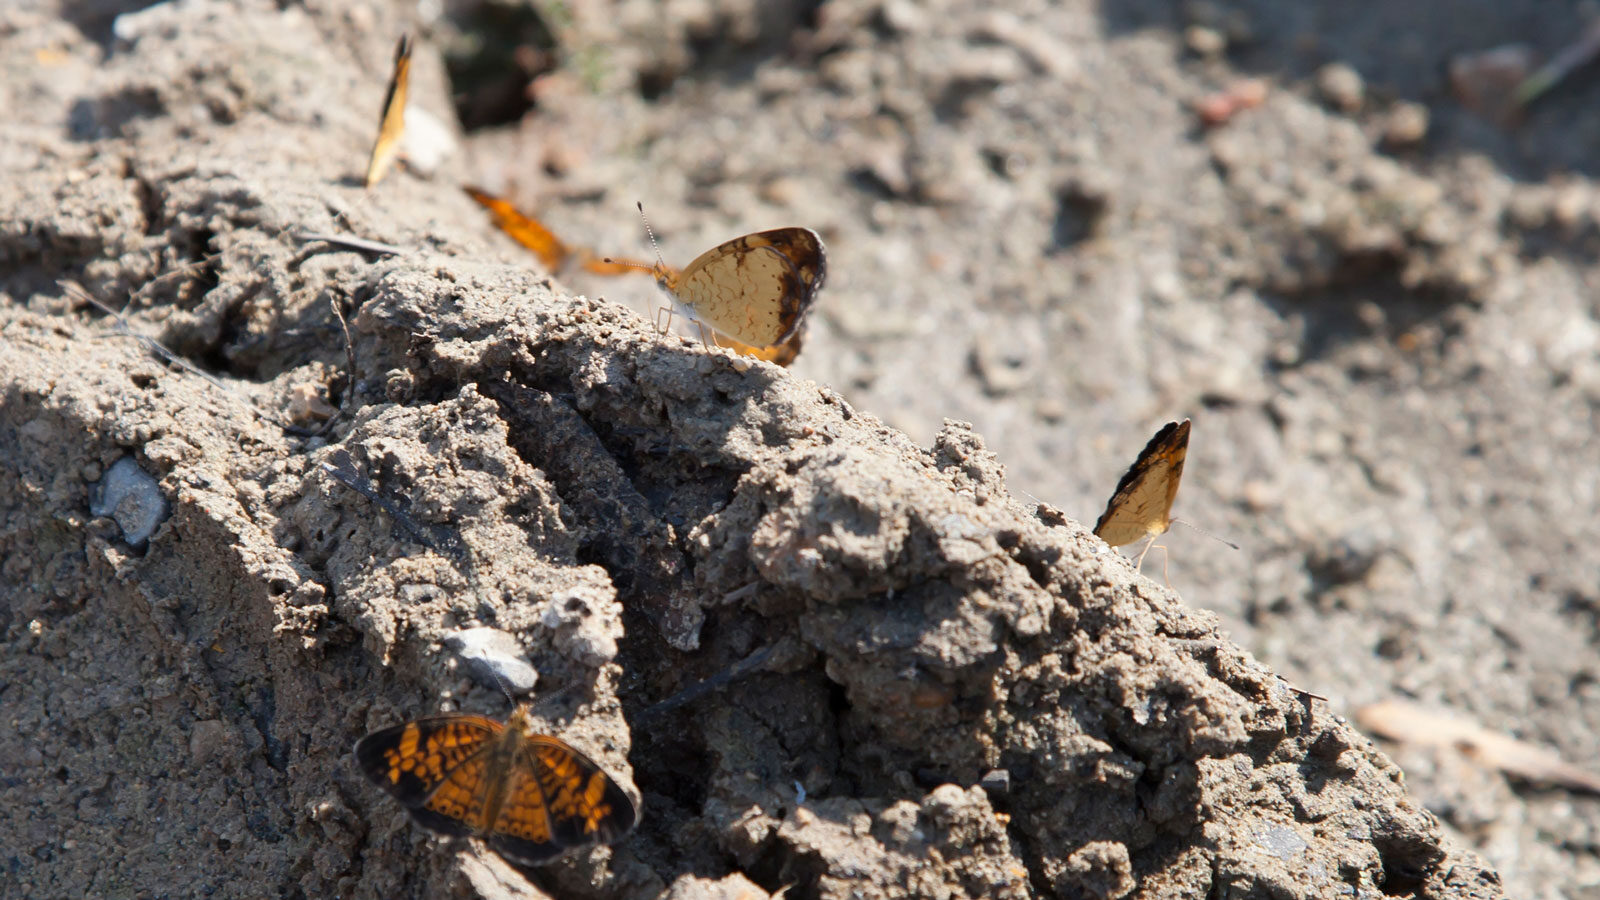 Pearl crescent butterflies on the mud